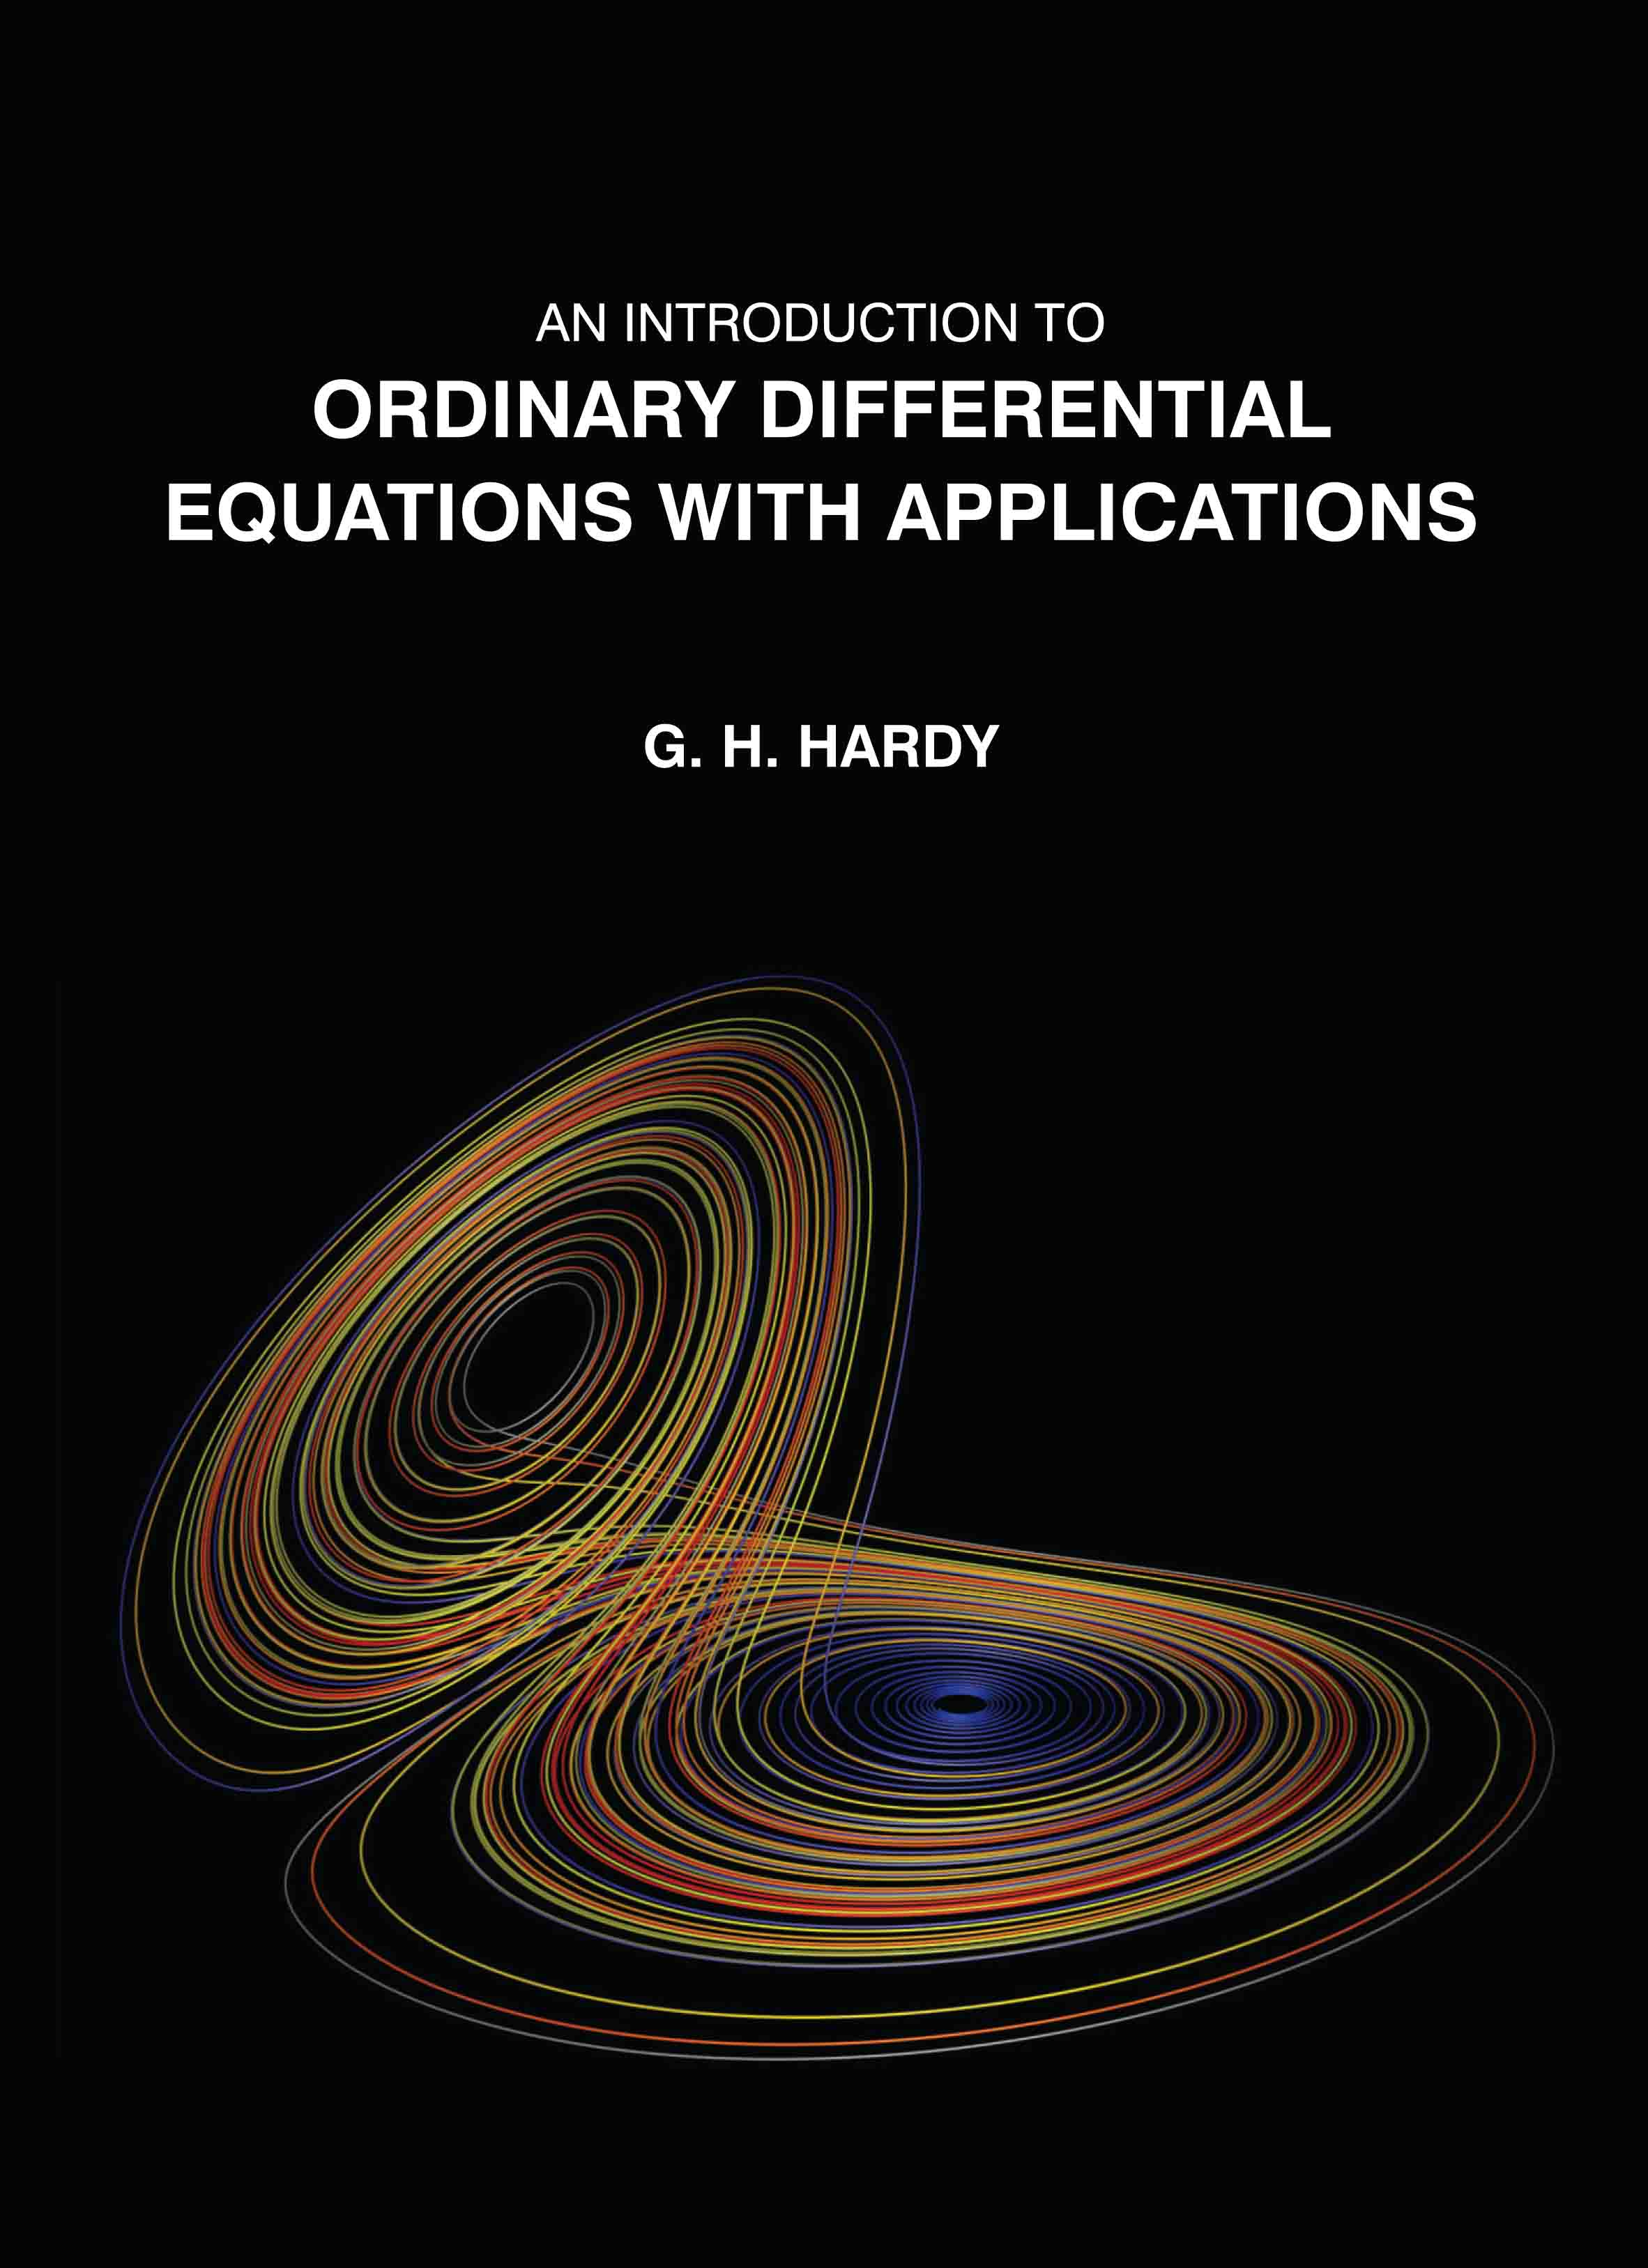 An Introduction to Ordinary Differential Equations with Applications